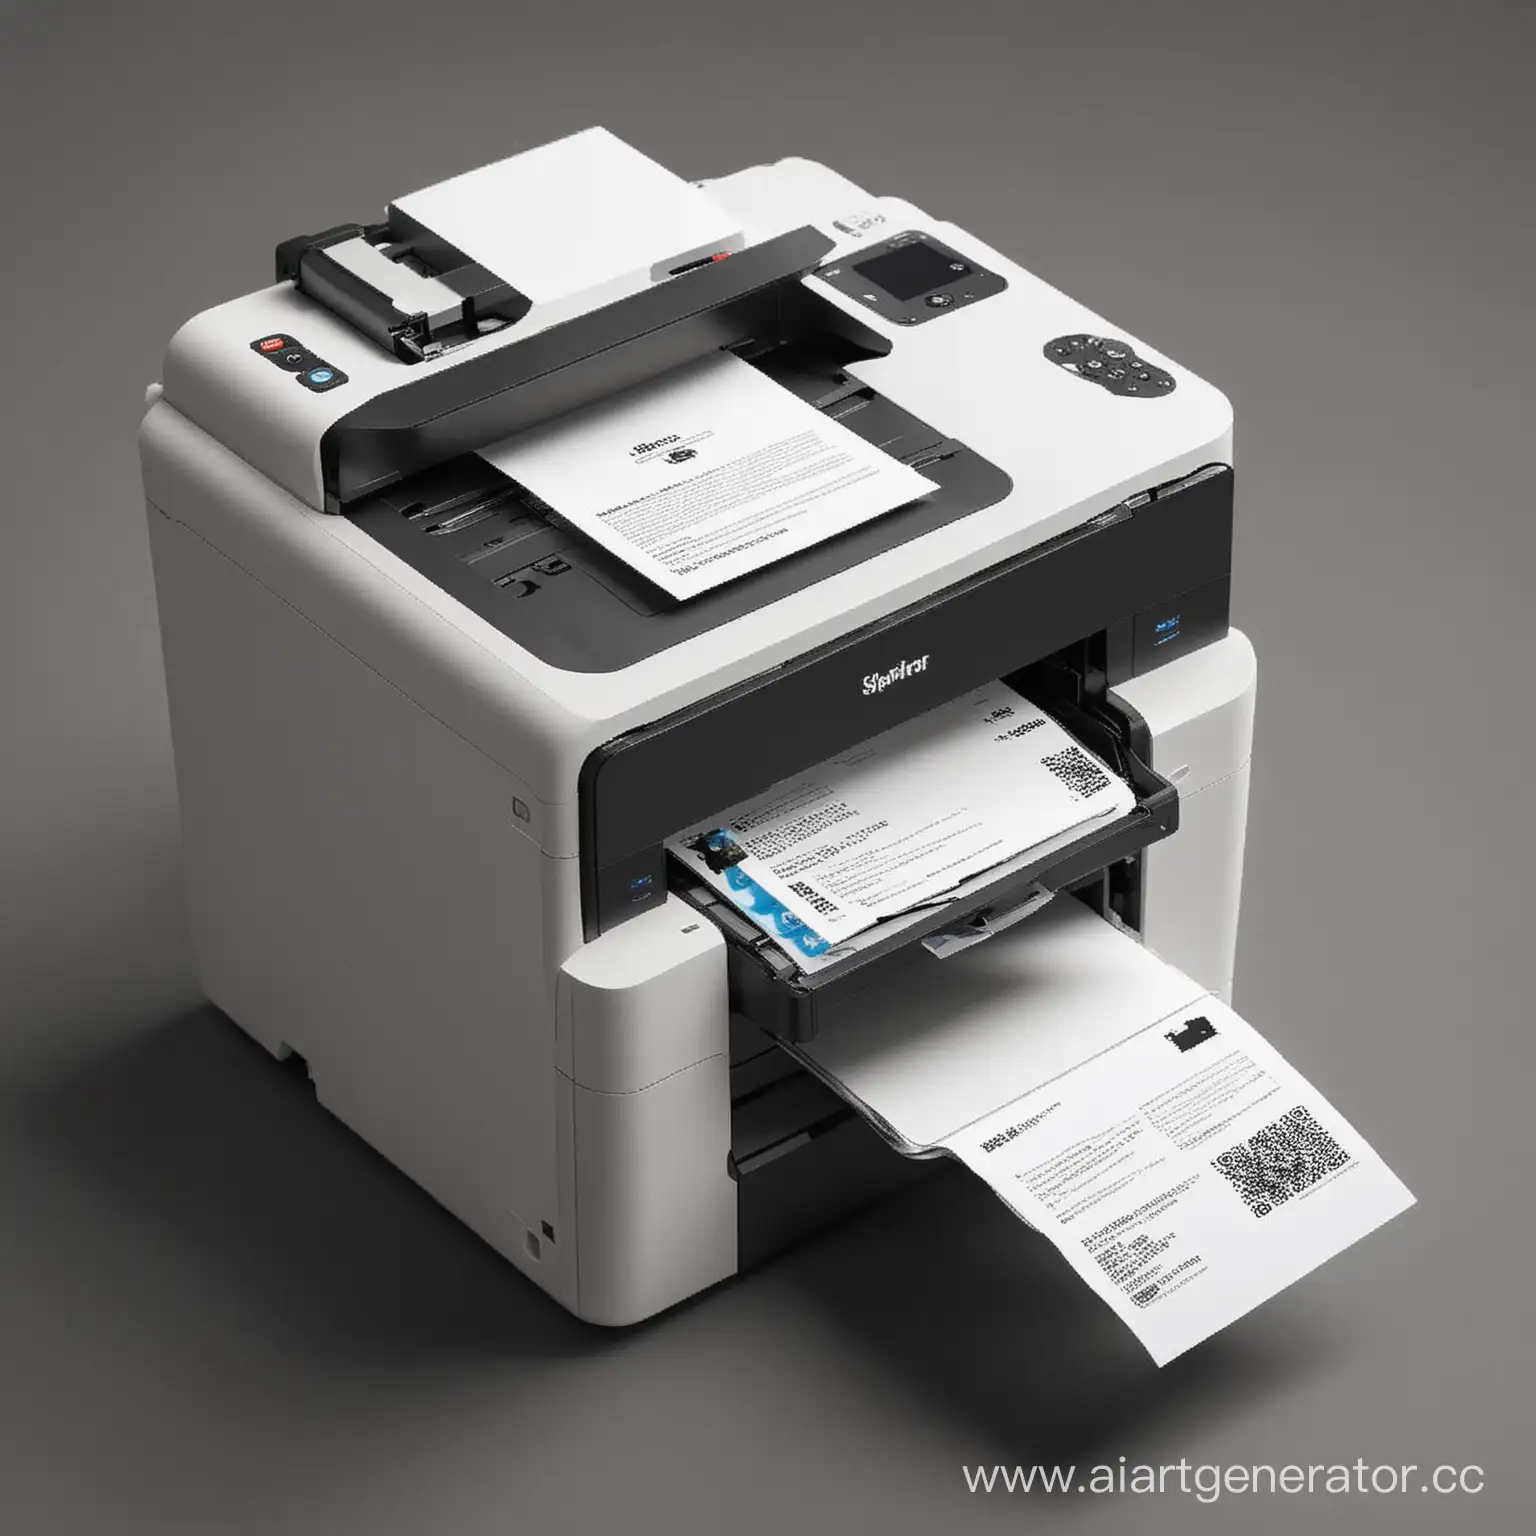 Smart-Printing-Service-Convenient-File-Printing-via-Card-or-App-Payment